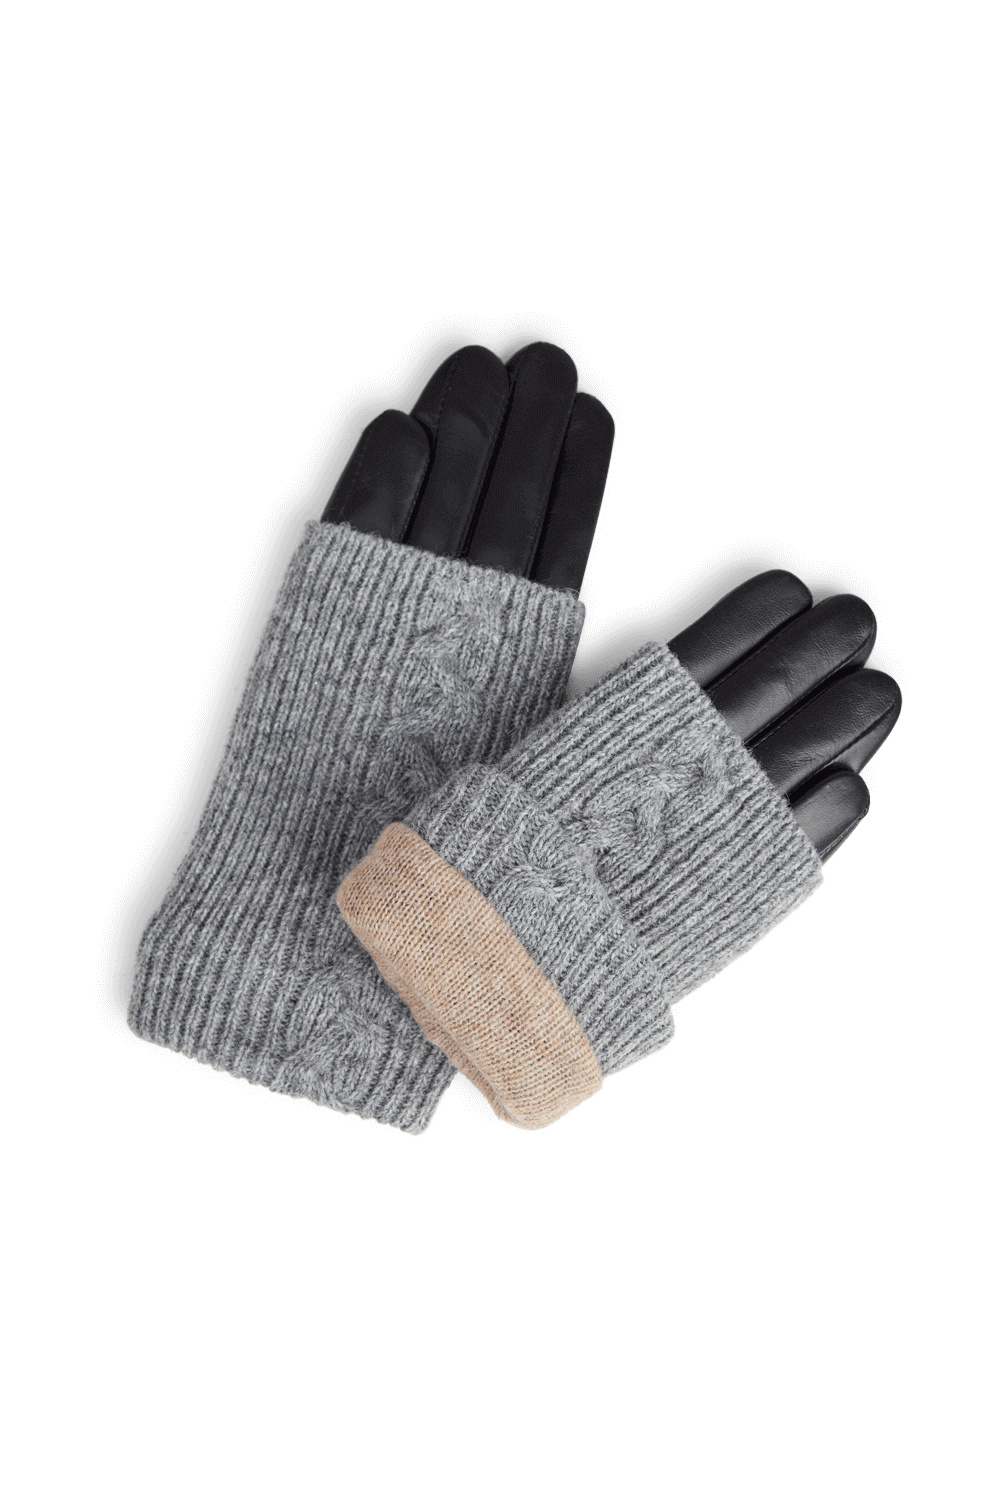 Helly Glove Cable Knit - Black w/ Grey-4